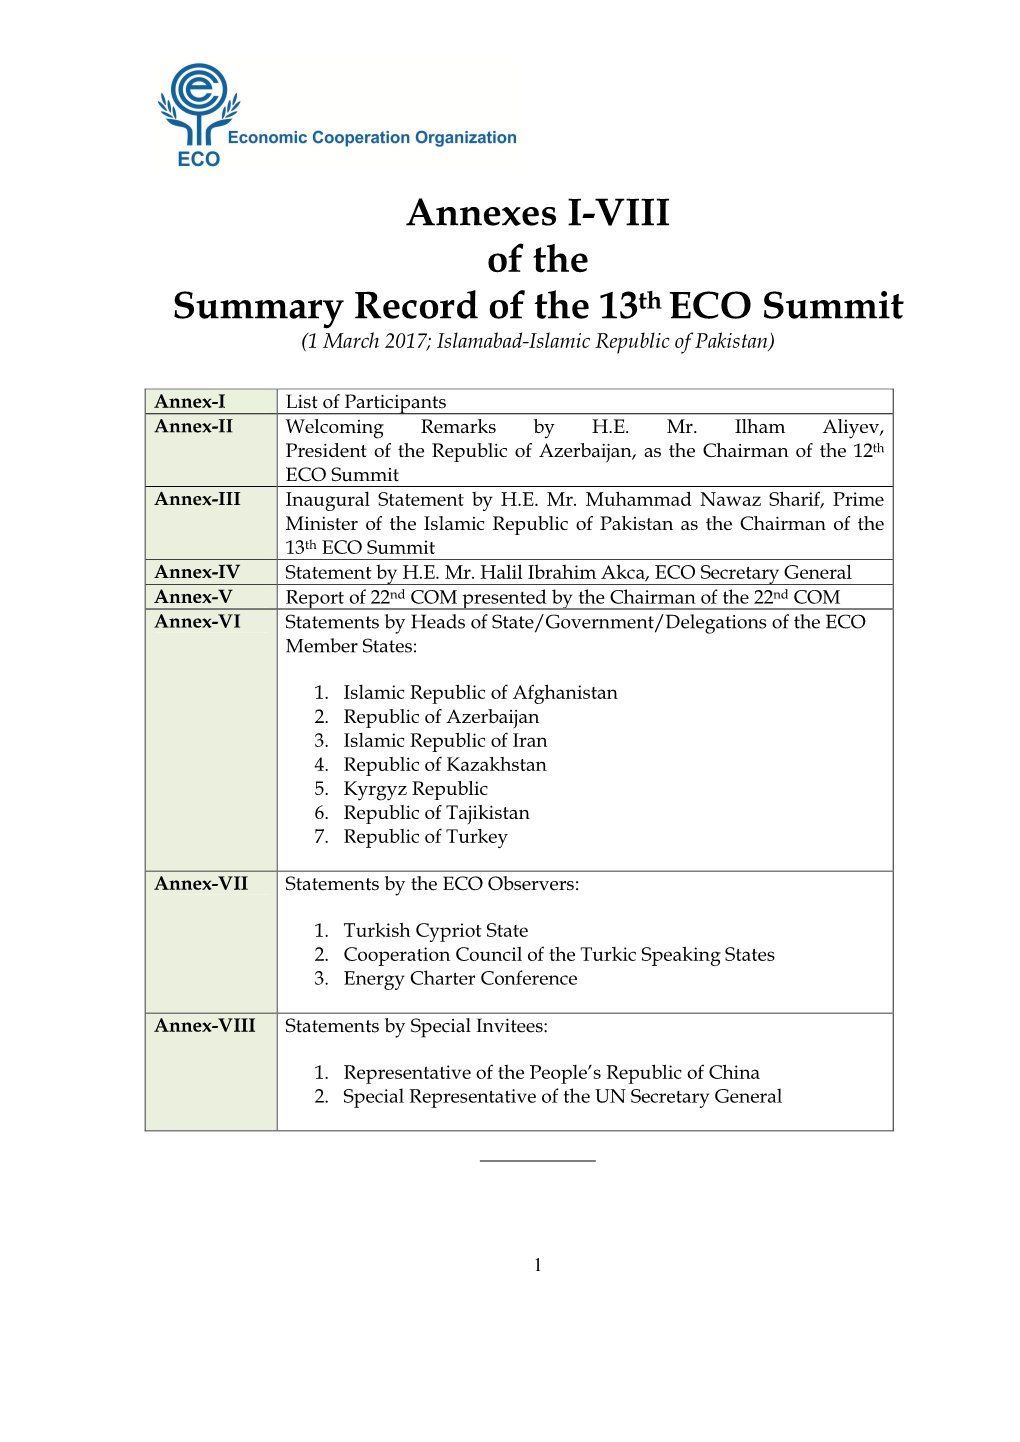 Annexes I-VIII of the Summary Record of the 13Th ECO Summit (1 March 2017; Islamabad-Islamic Republic of Pakistan)